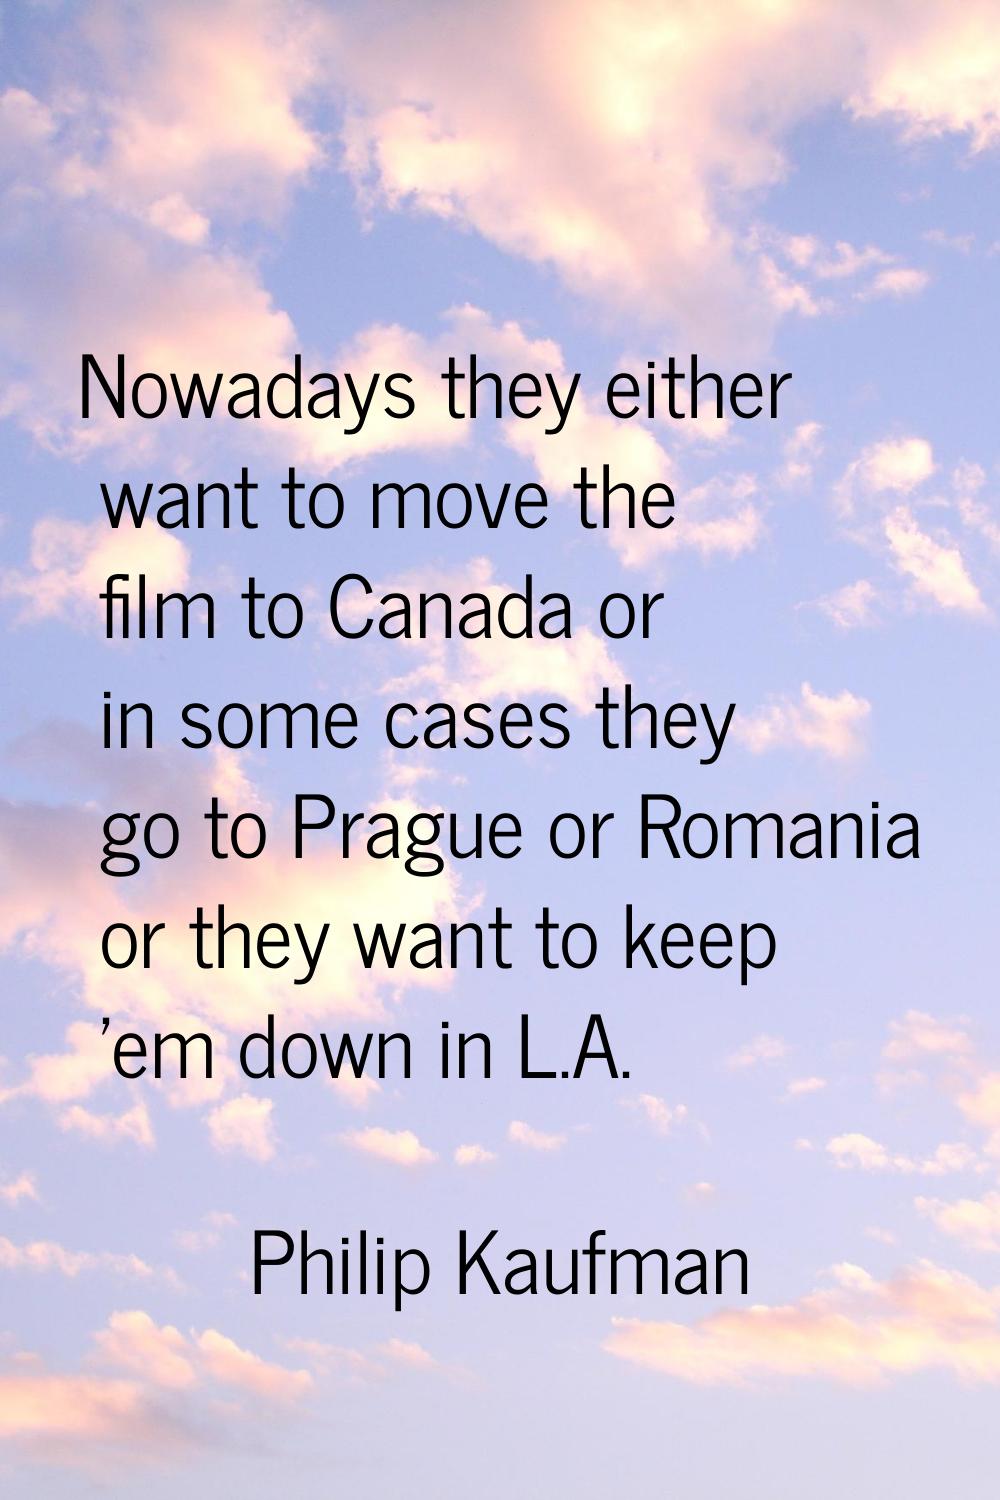 Nowadays they either want to move the film to Canada or in some cases they go to Prague or Romania 